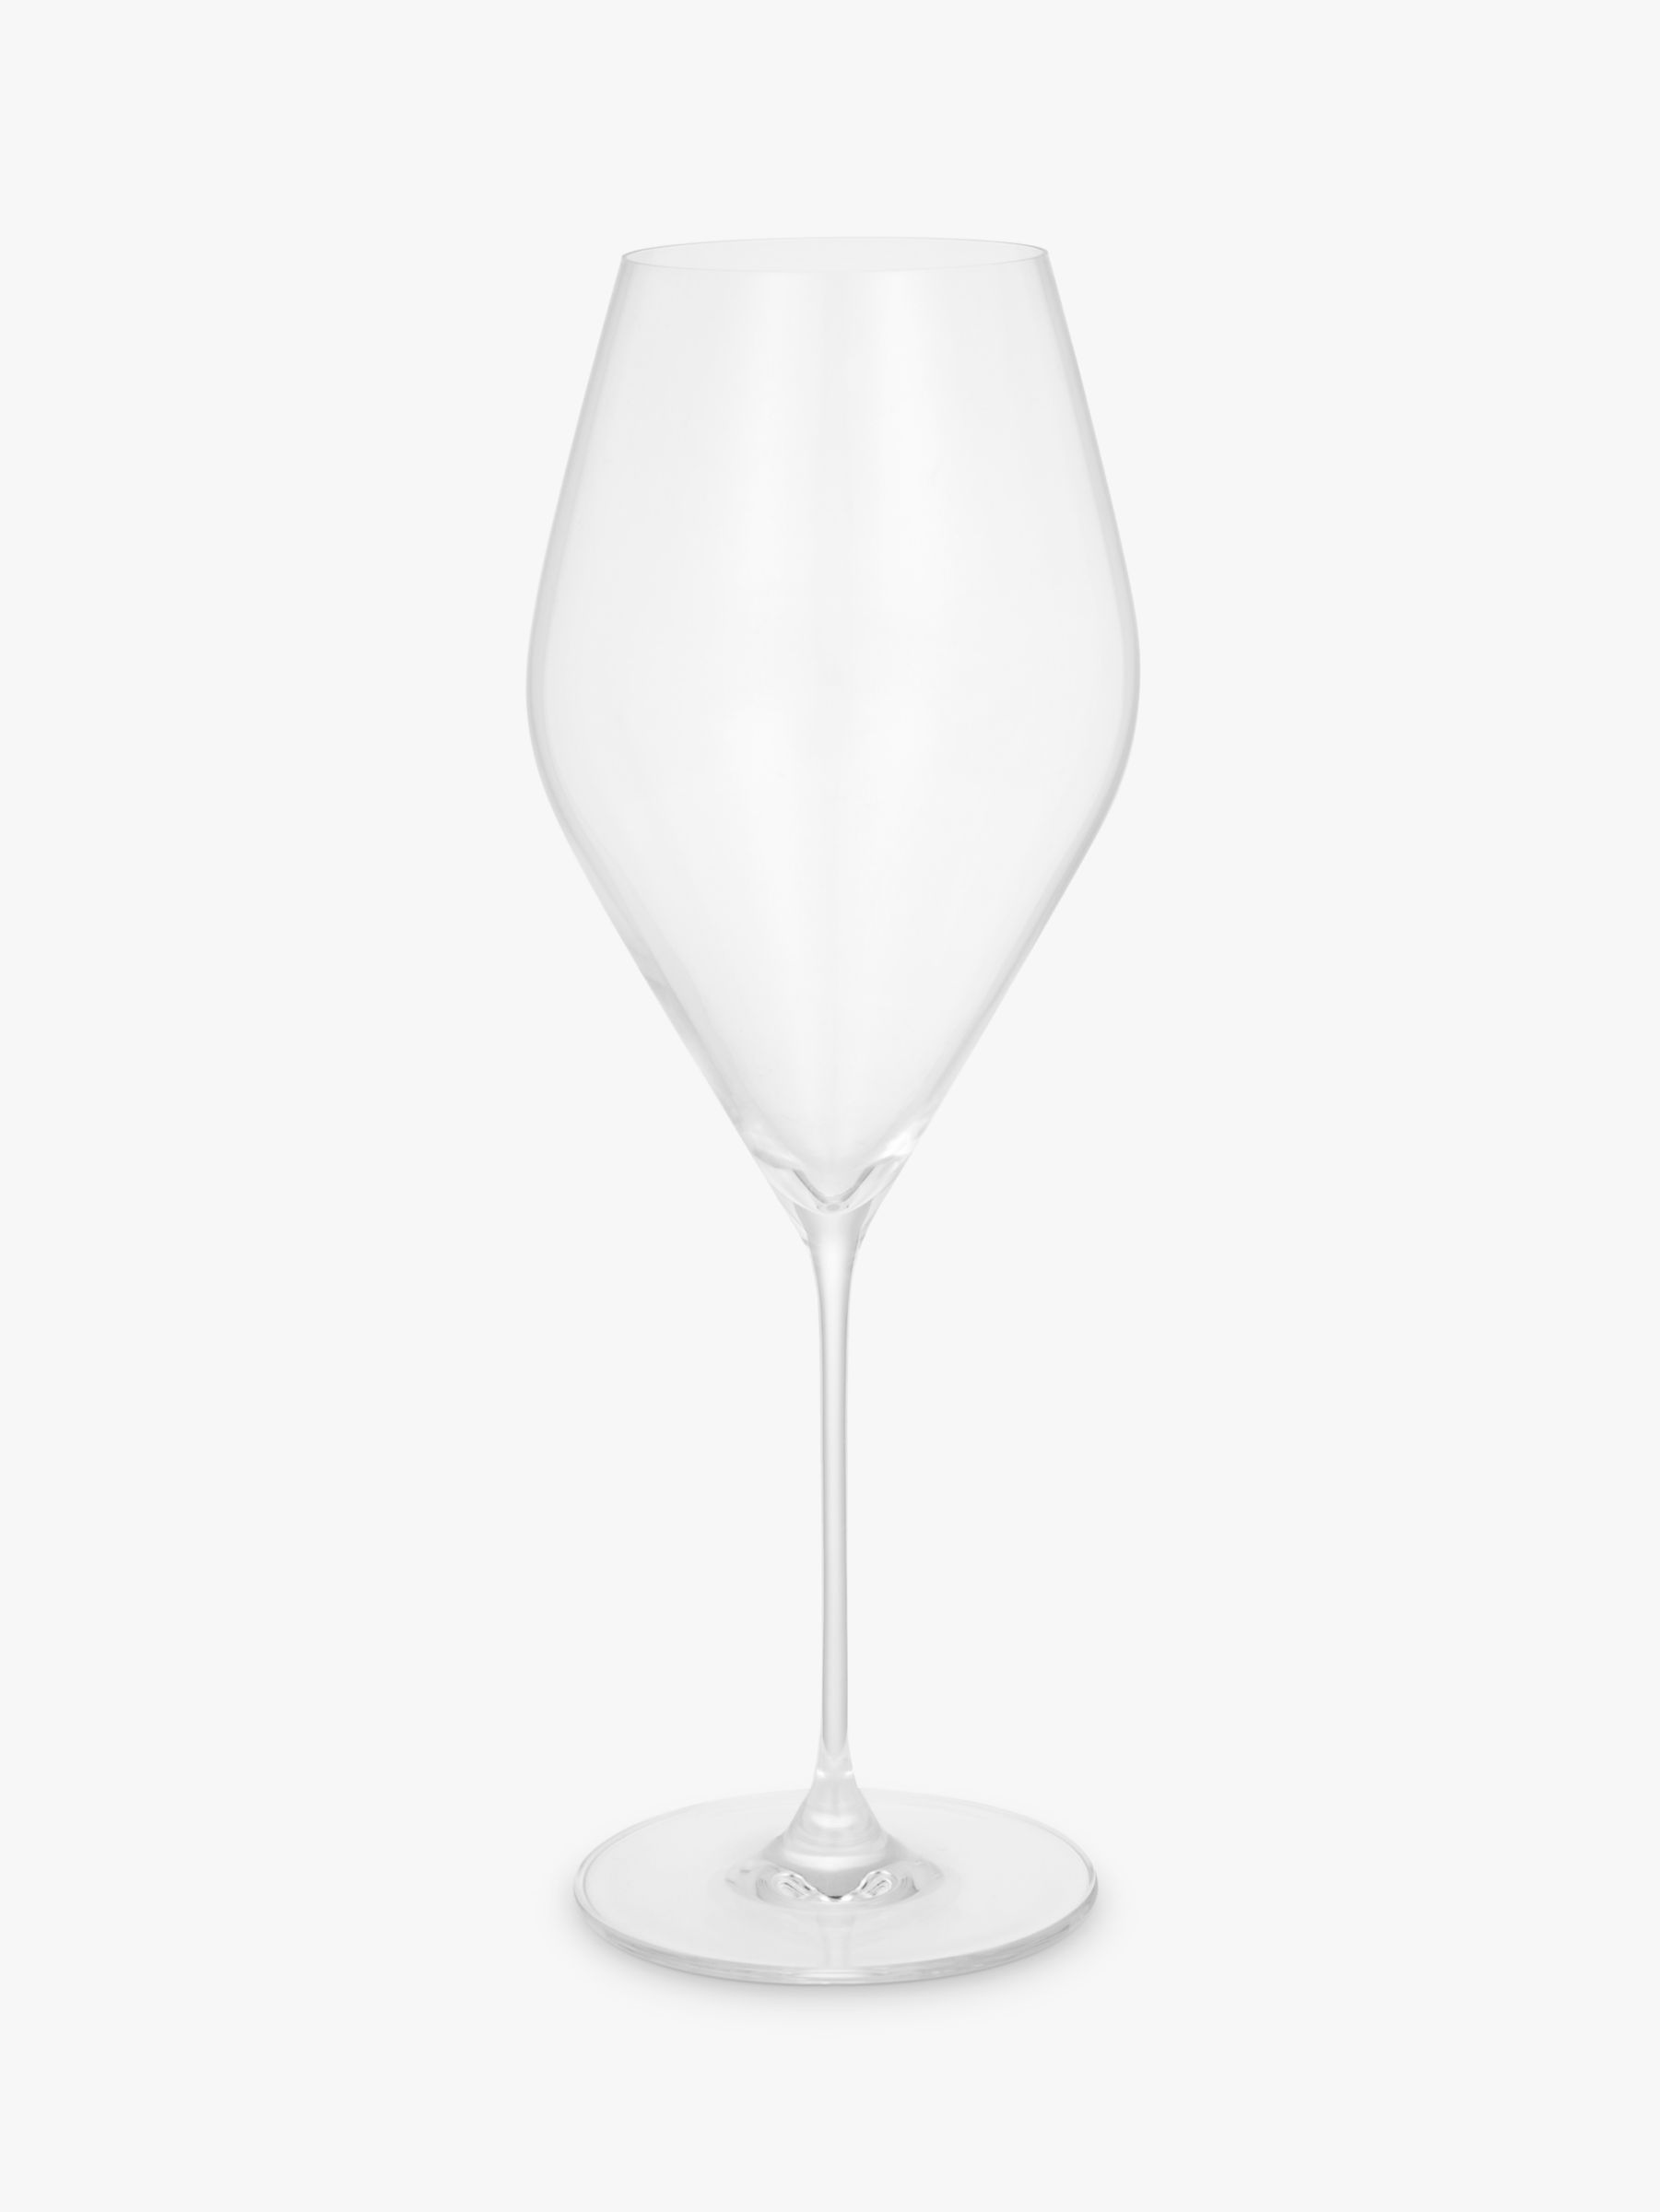 Croft Collection Swan Crystal Wine Glasses, Clear, 700ml, Set of 4